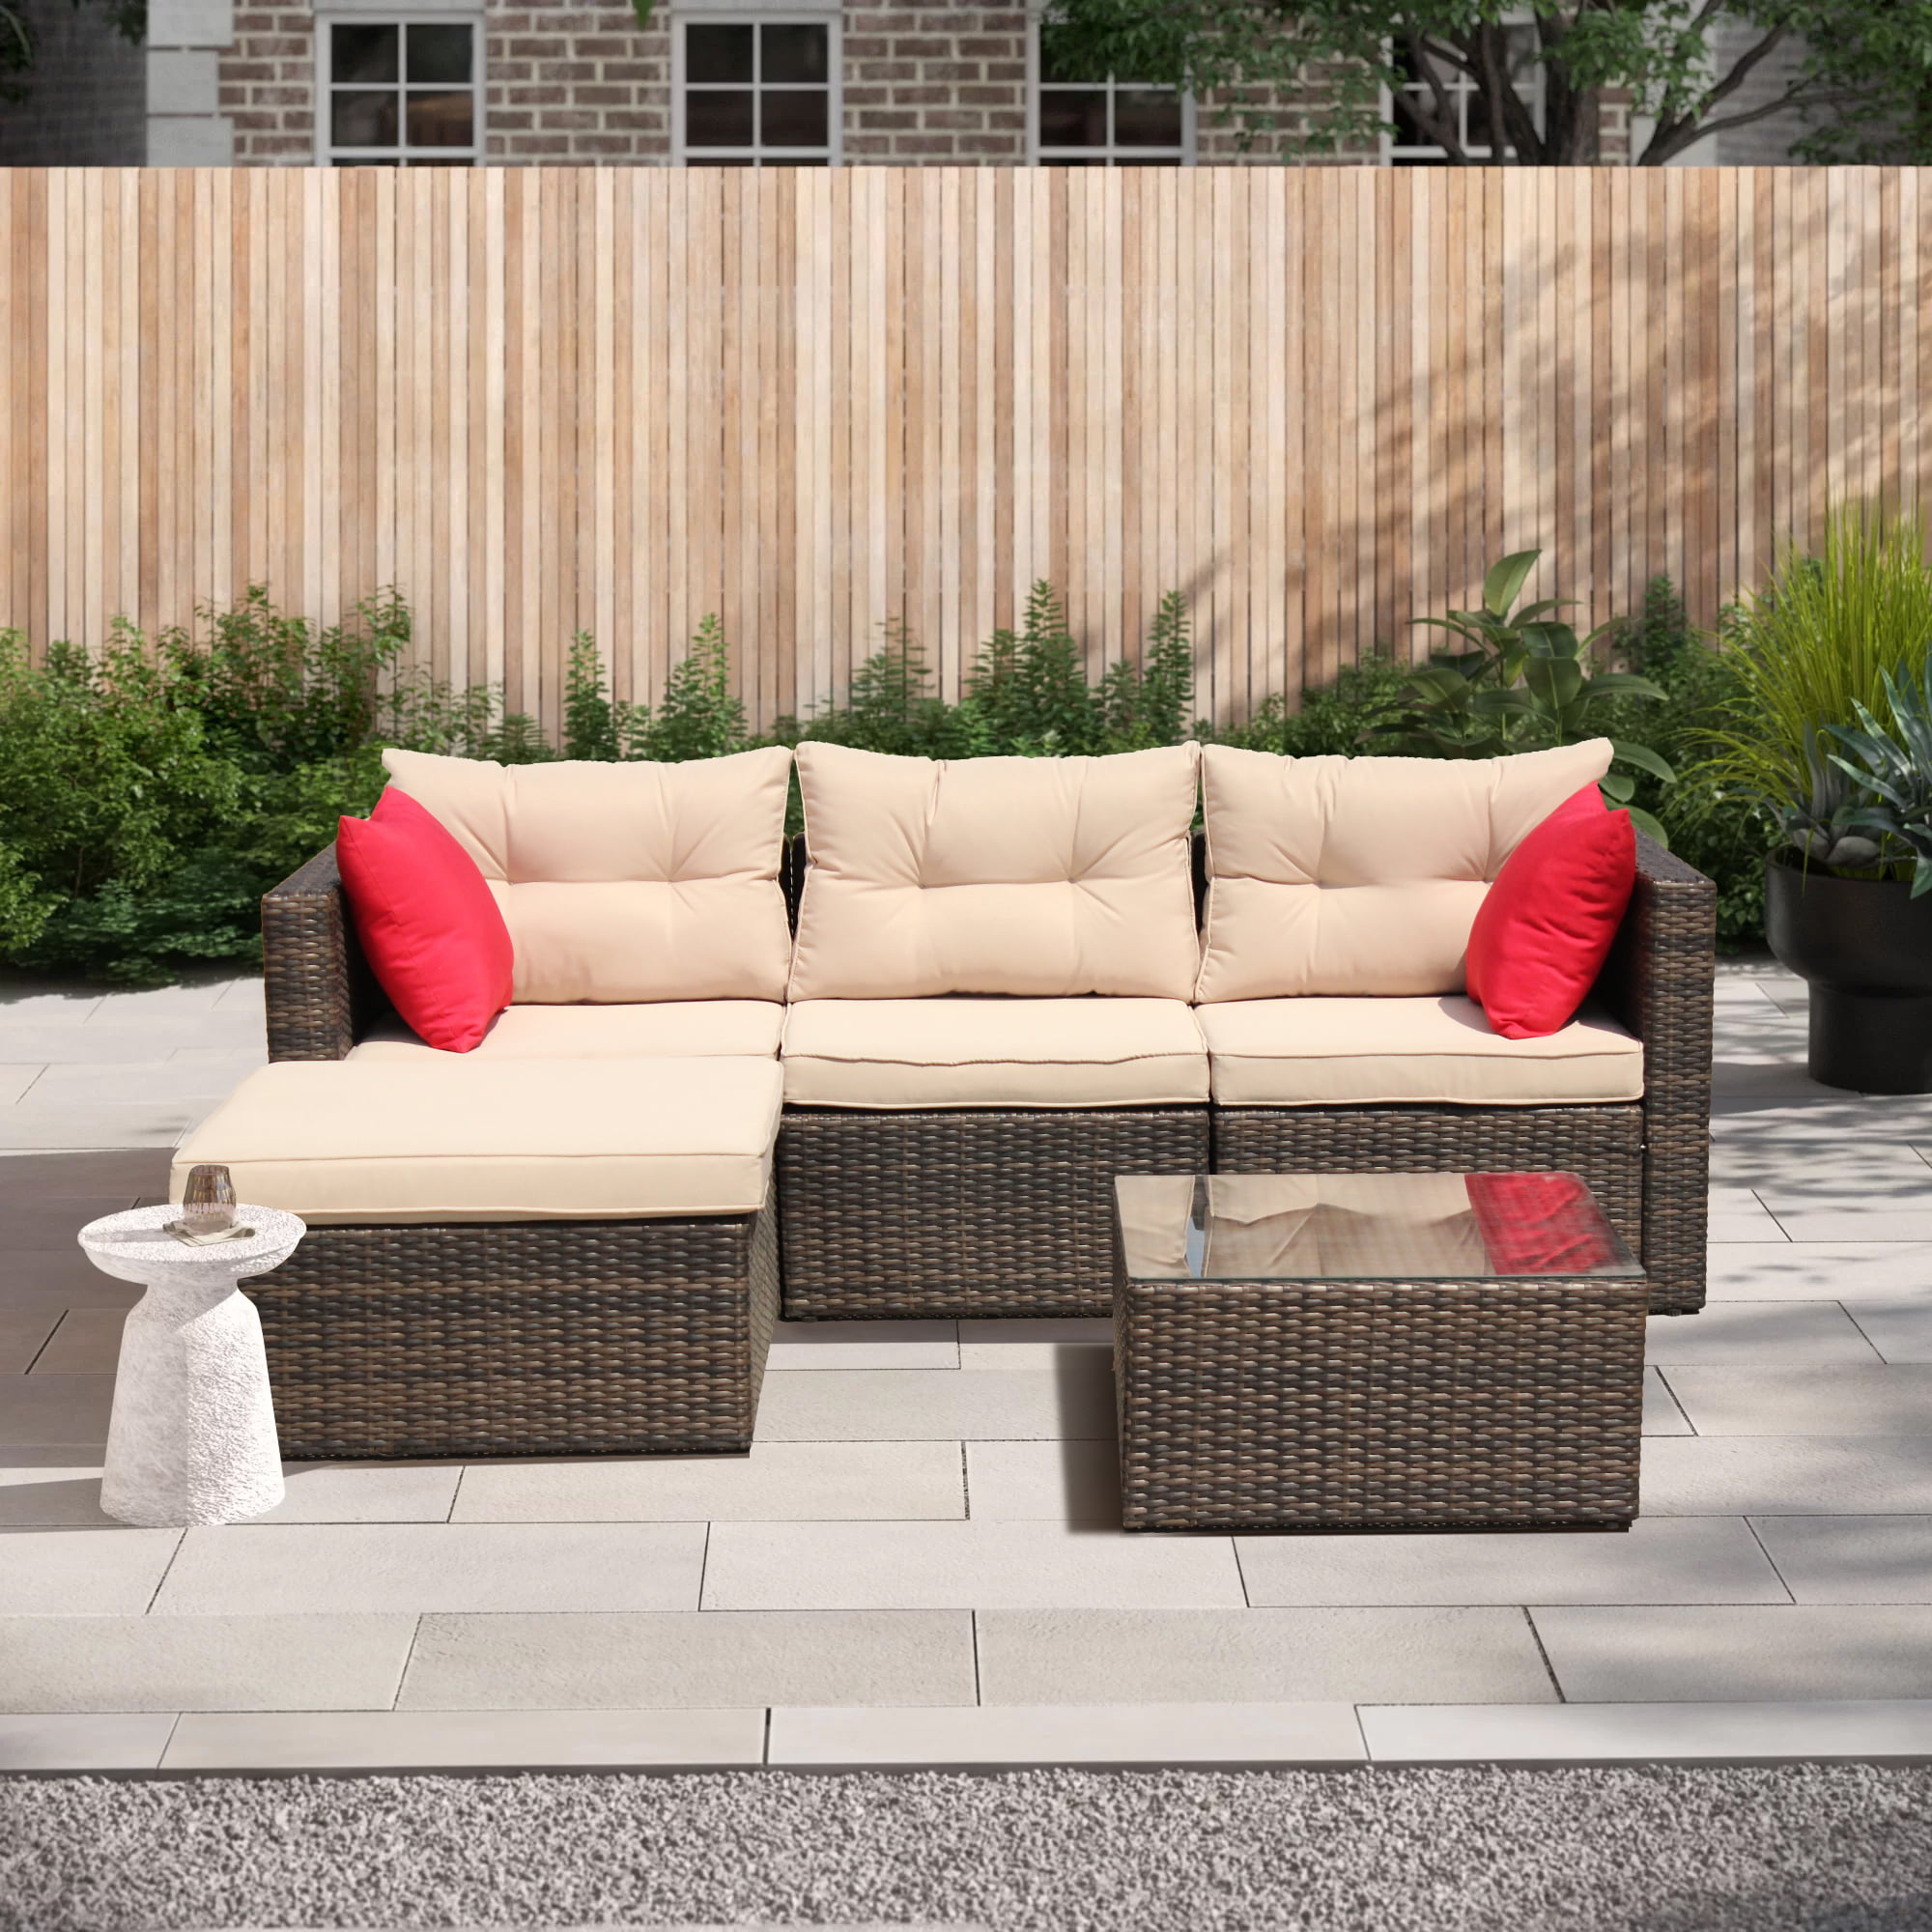 Outdoor Patio Furniture Sets Clearance, 5 Piece Ratten Wicker Sectional Sofa Set, Cushioned ...